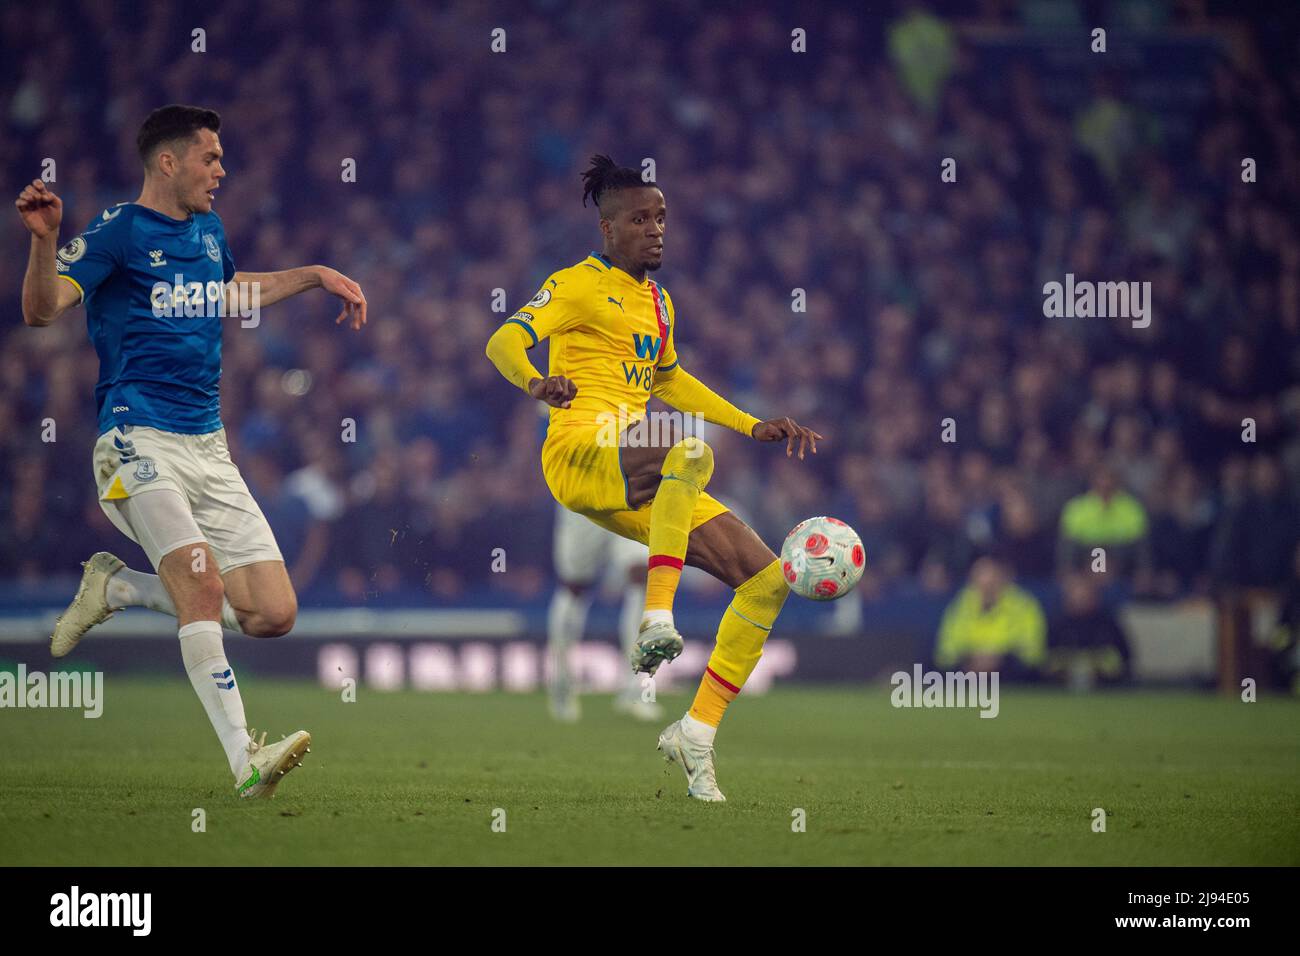 LIVERPOOL, ENGLAND - MAY 19: Michael Keane, Wilfried Zaha during the Premier League match between Everton and Crystal Palace at Goodison Park on May 19, 2022 in Liverpool, United Kingdom. (Photo by Sebastian Frej) Stock Photo